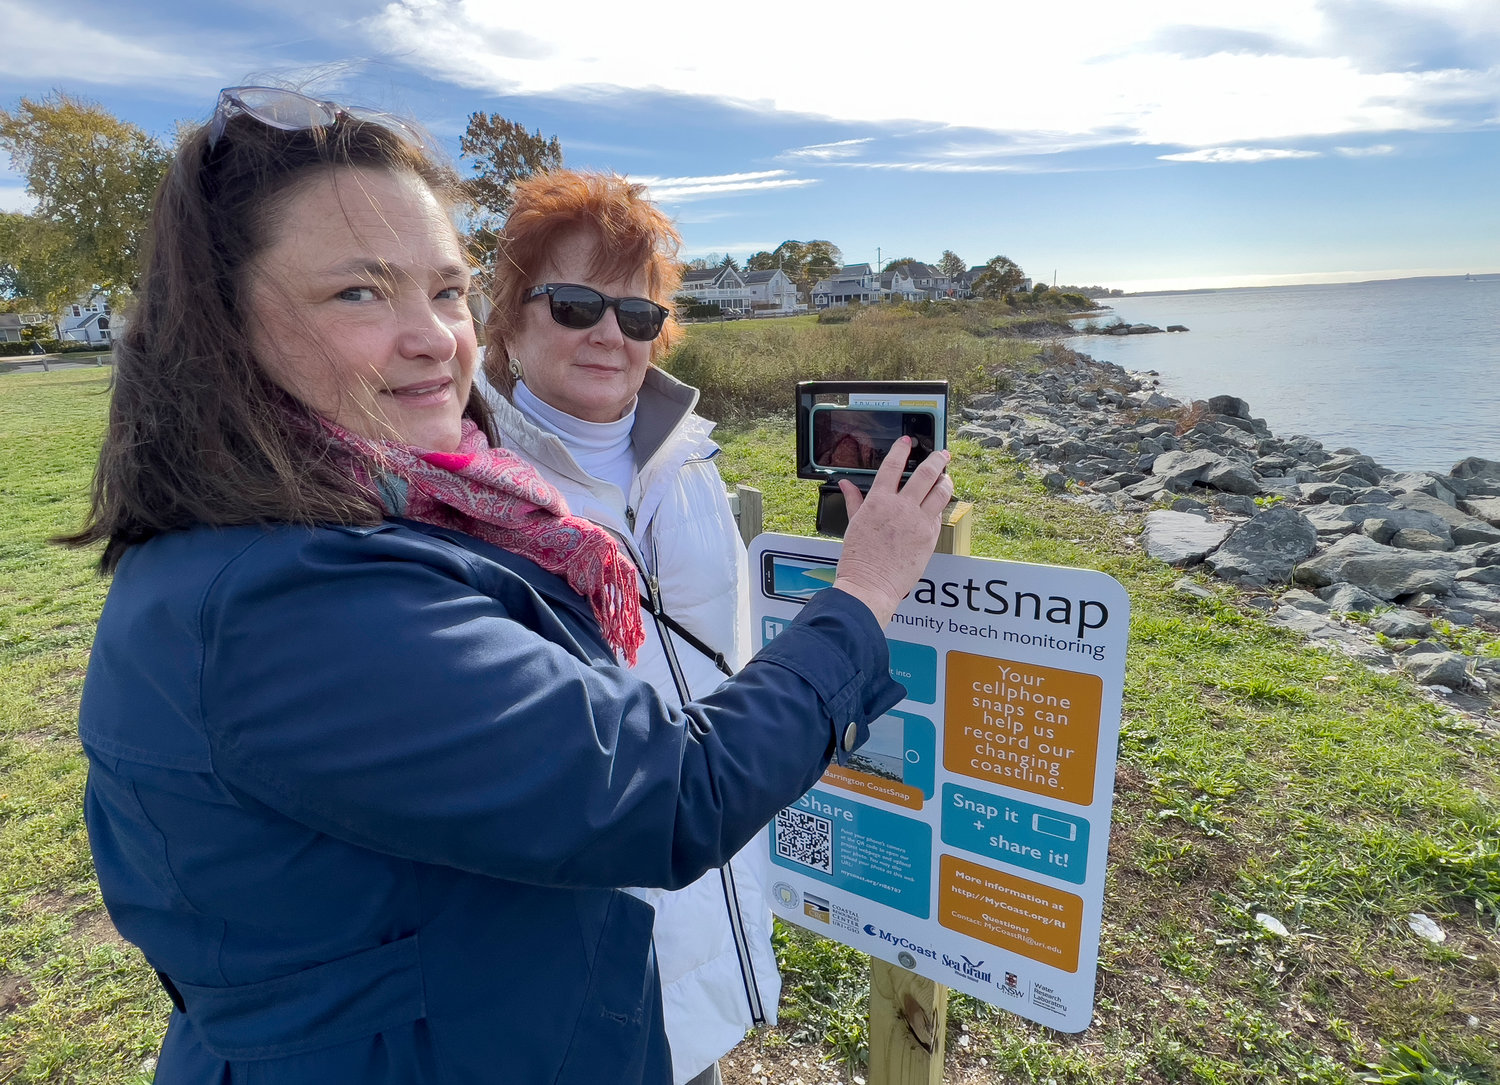 Barrington Town Planner Teresa Crean (left) and Barrington Resilience and Energy Committee member Lynne Carter display the new CoastSnap Station at Latham Park in Barrington.